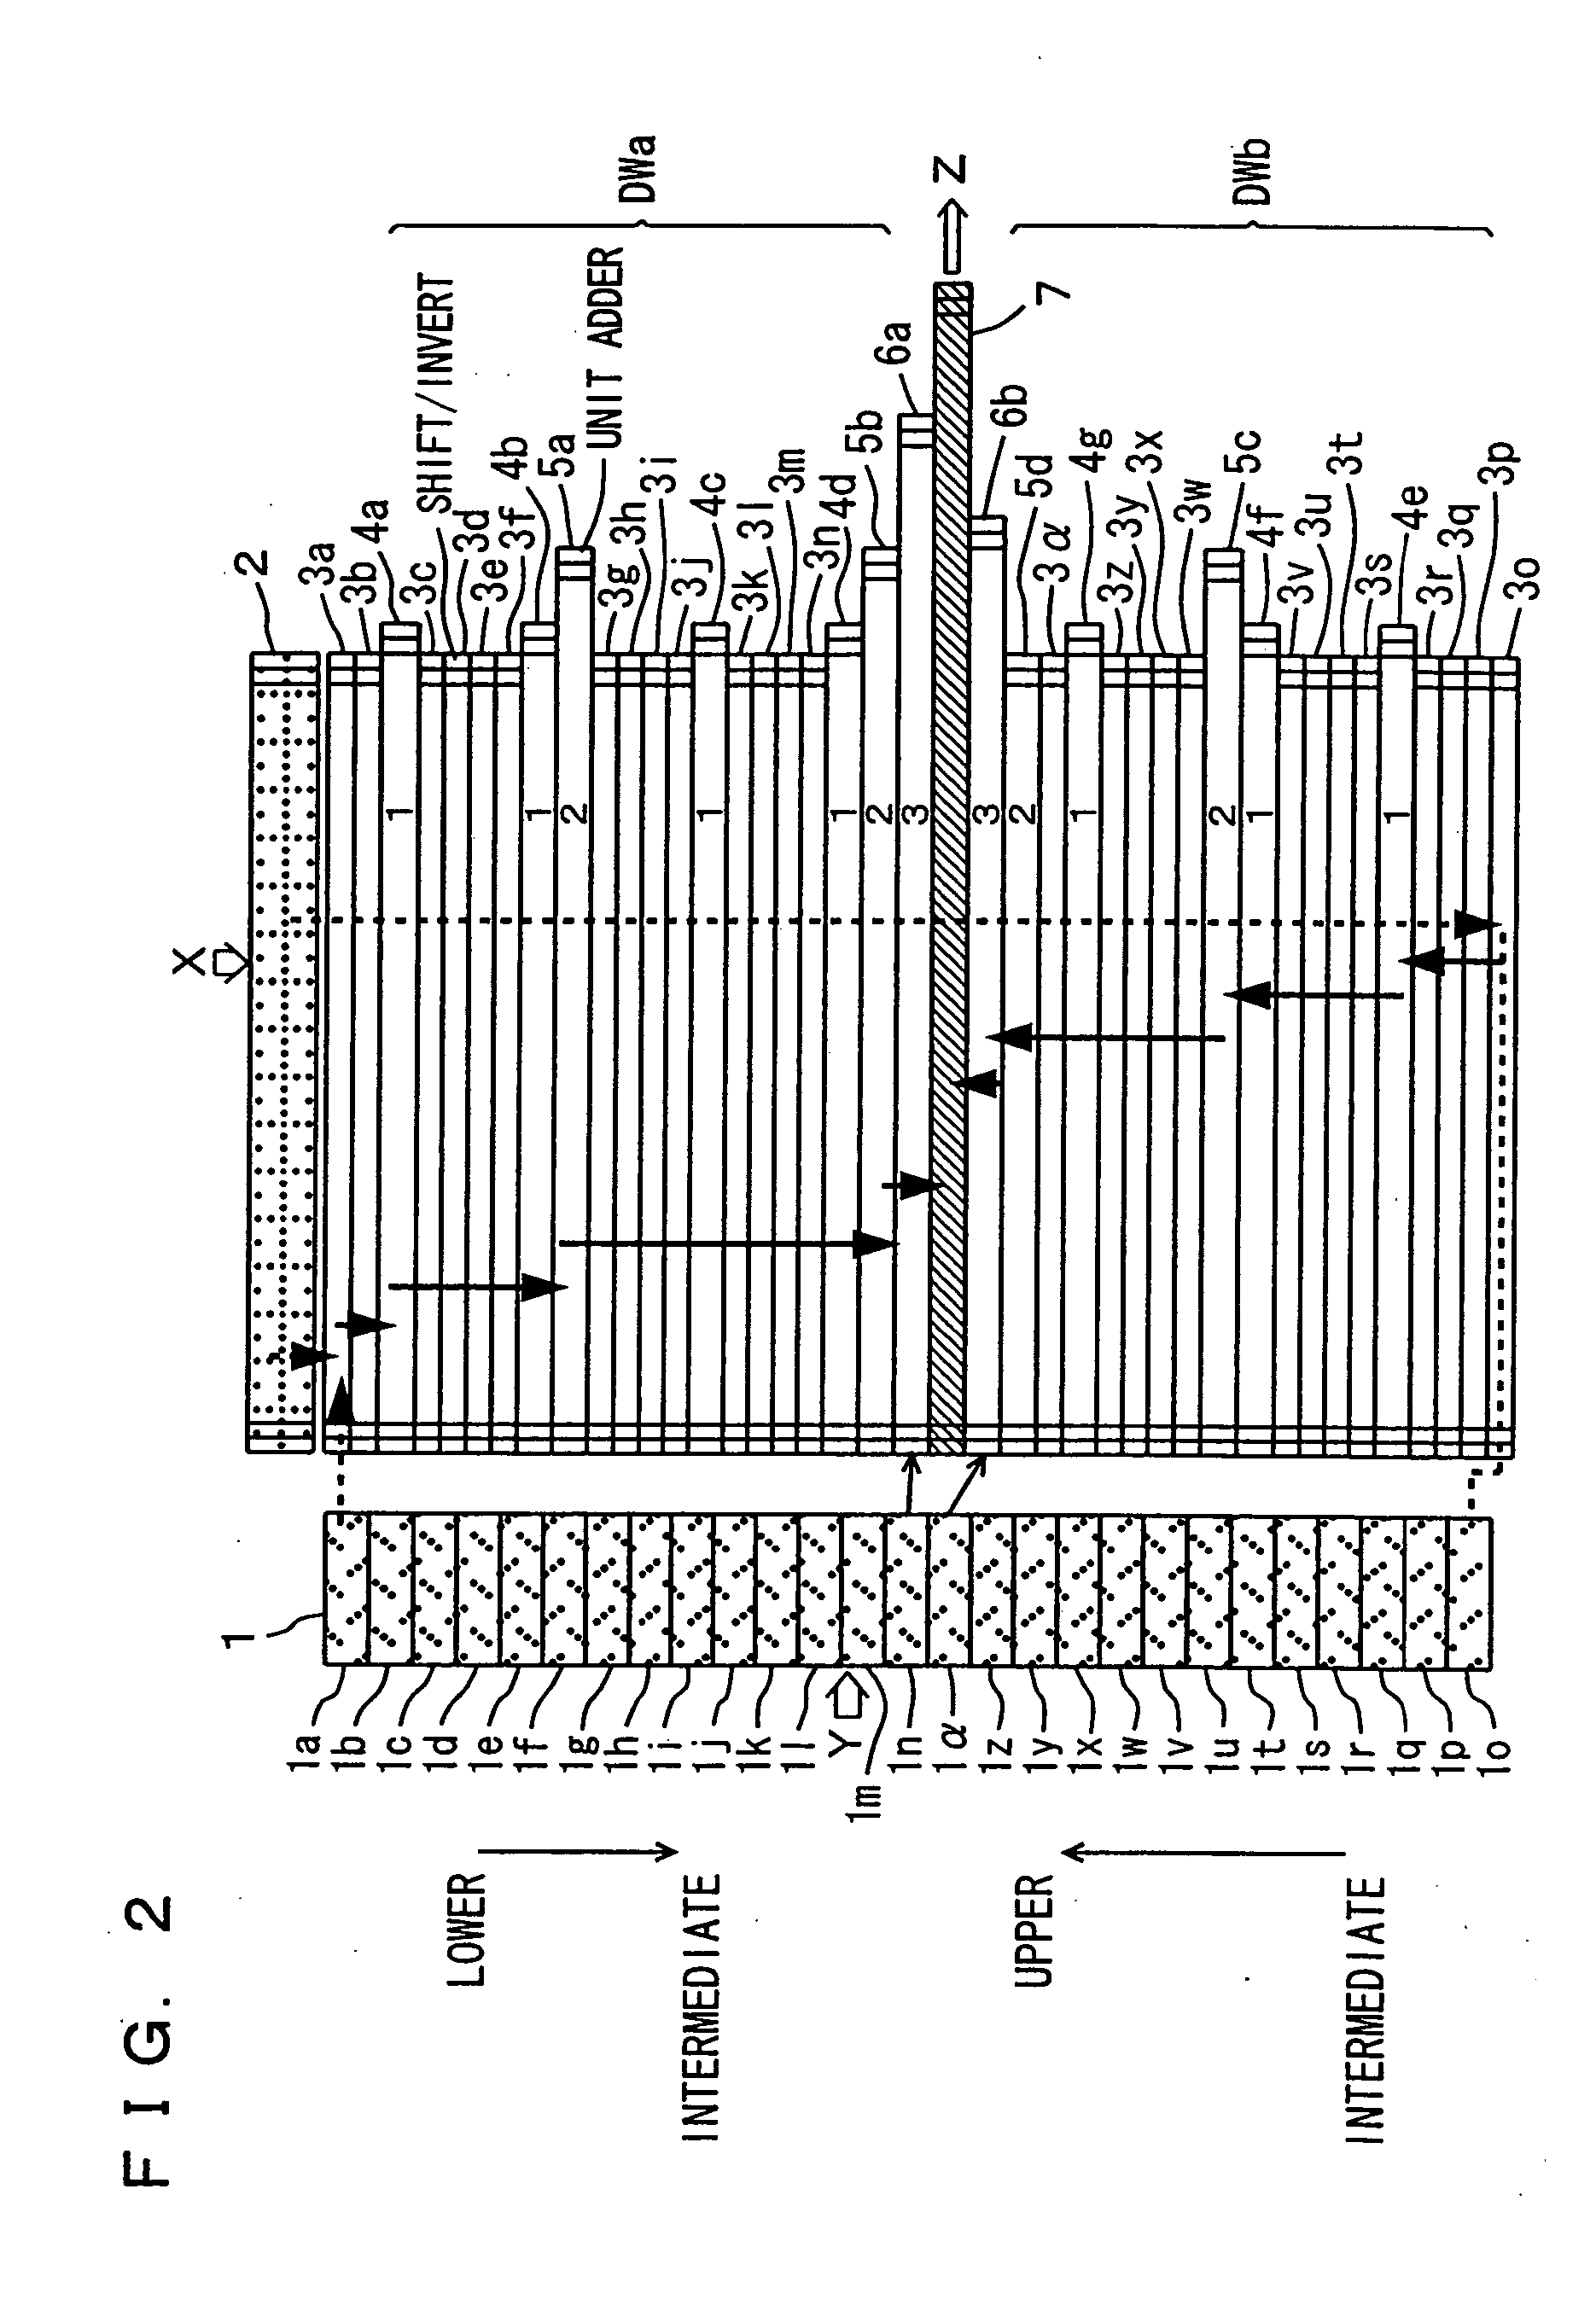 High speed multiplication apparatus of Wallace tree type with high area efficiency